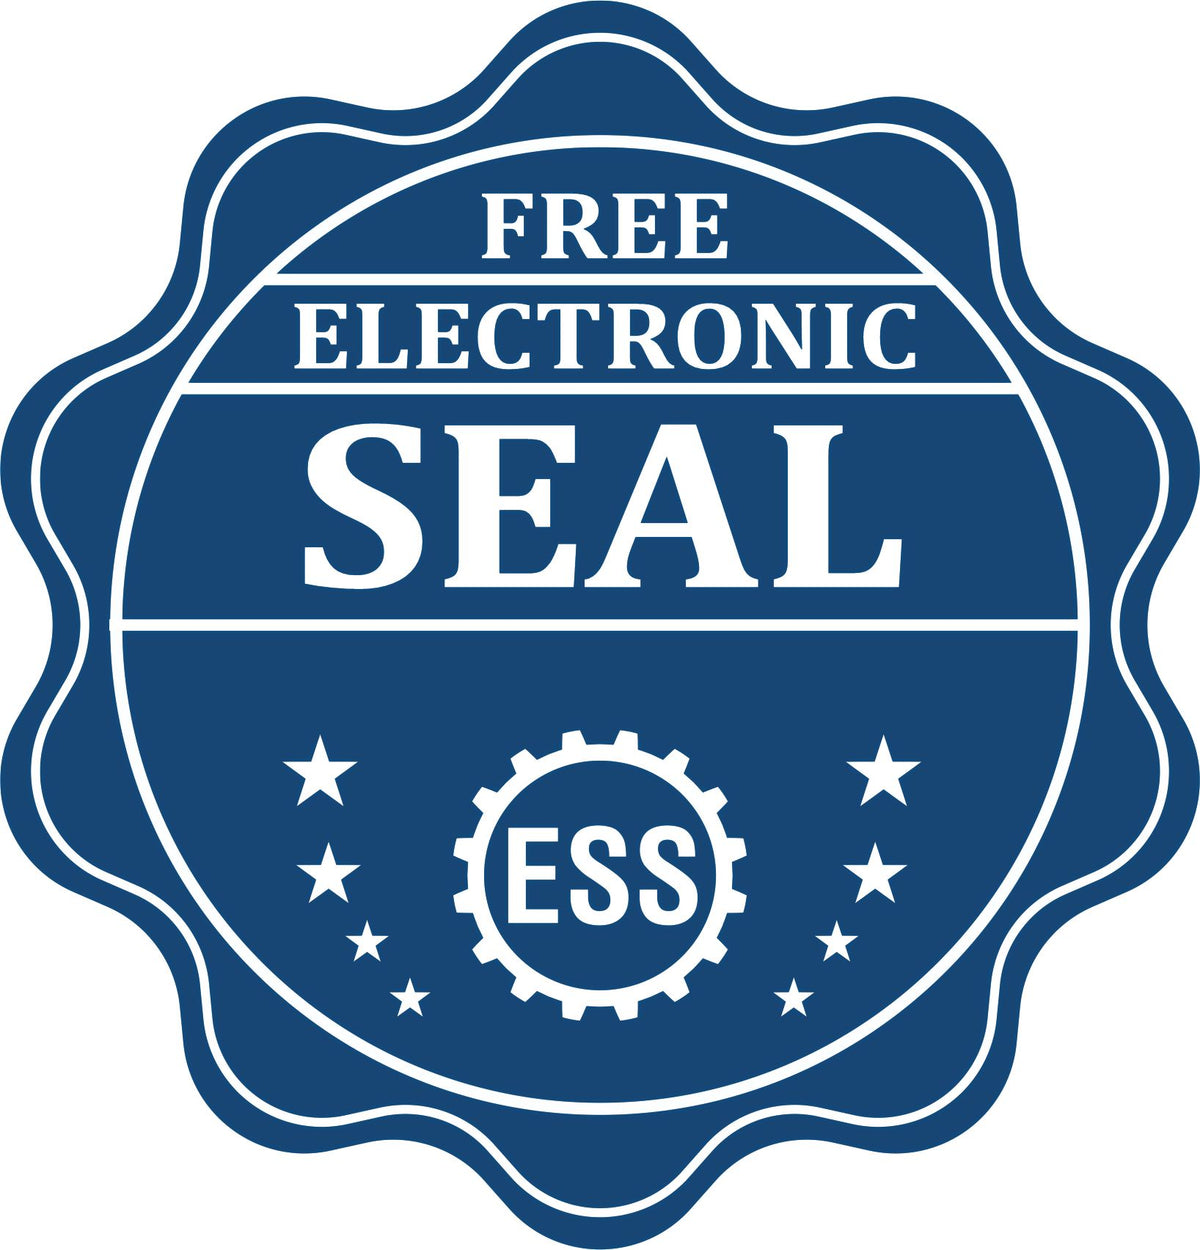 A badge showing a free electronic seal for the Hybrid Ohio Landscape Architect Seal with stars and the ESS gear on the emblem.